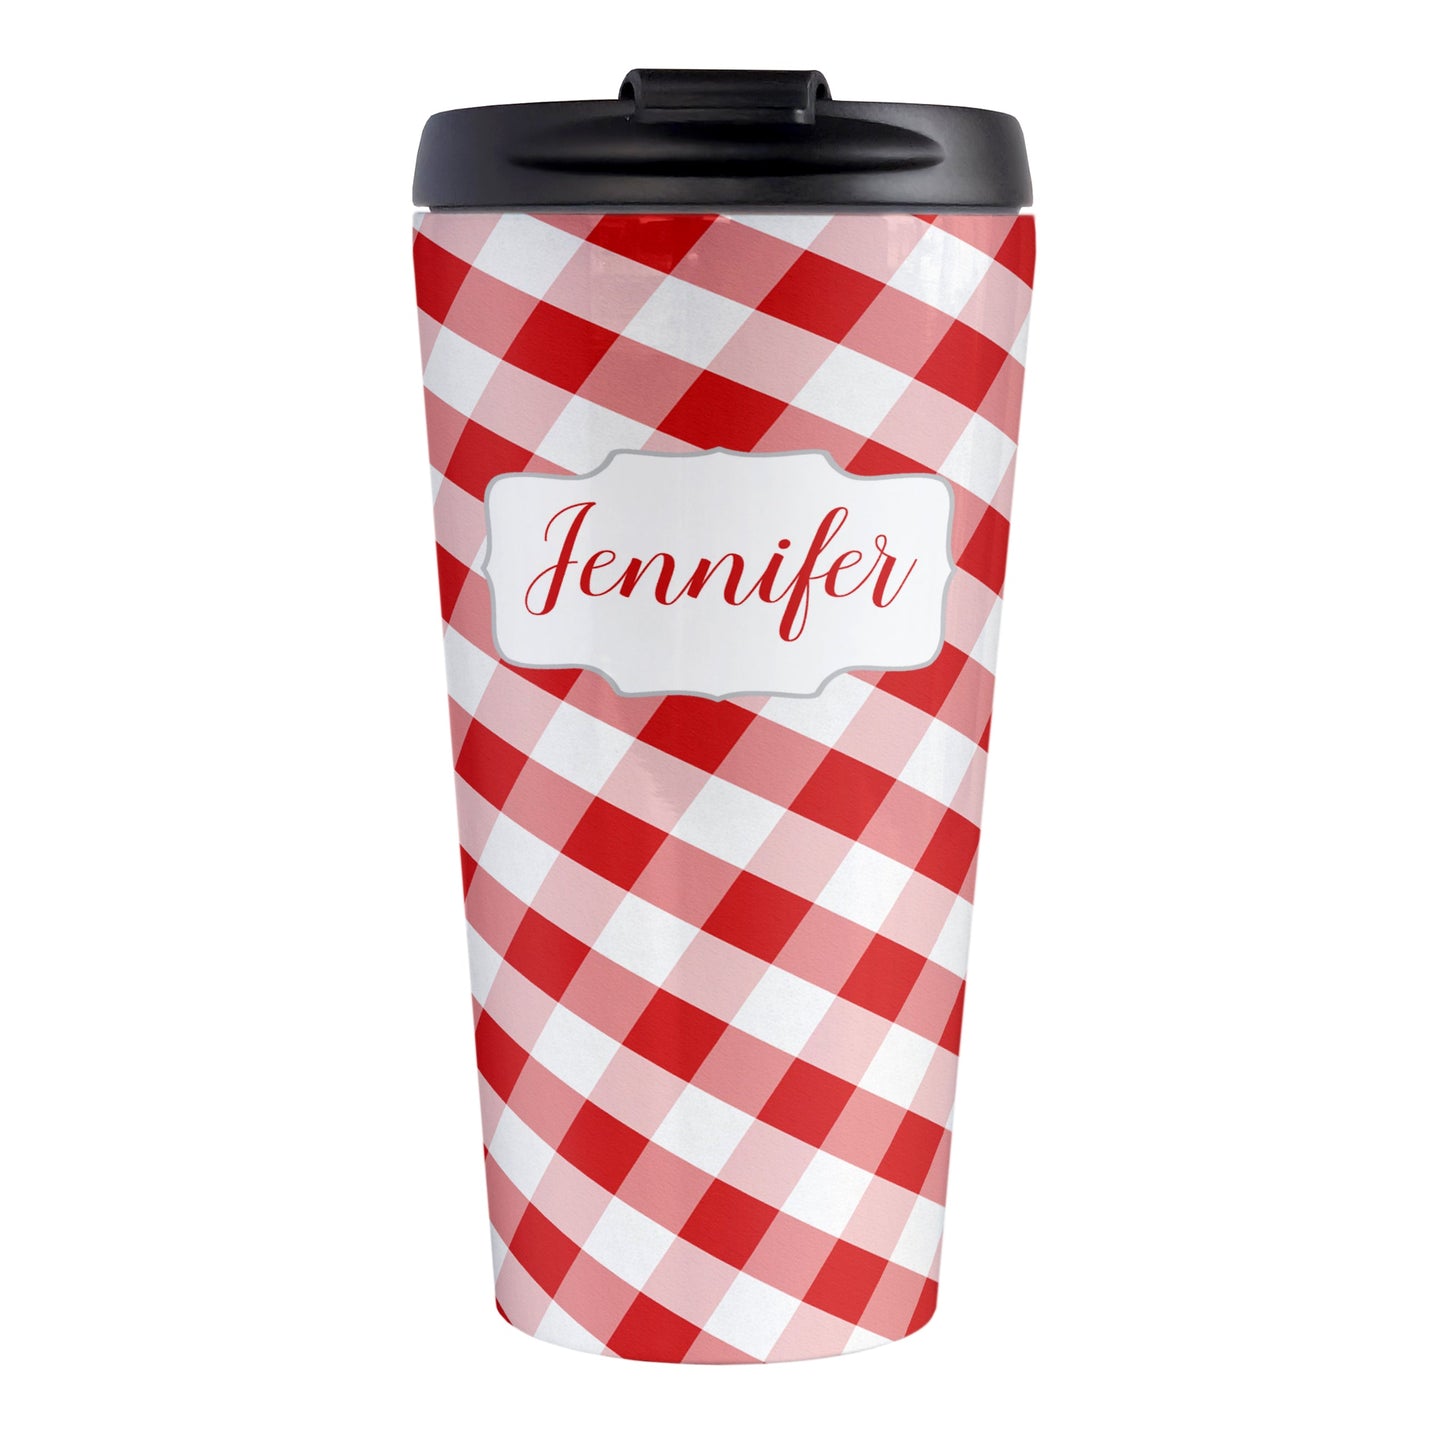 Personalized Red Gingham Travel Mug (15oz, stainless steel insulated) at Amy's Coffee Mugs